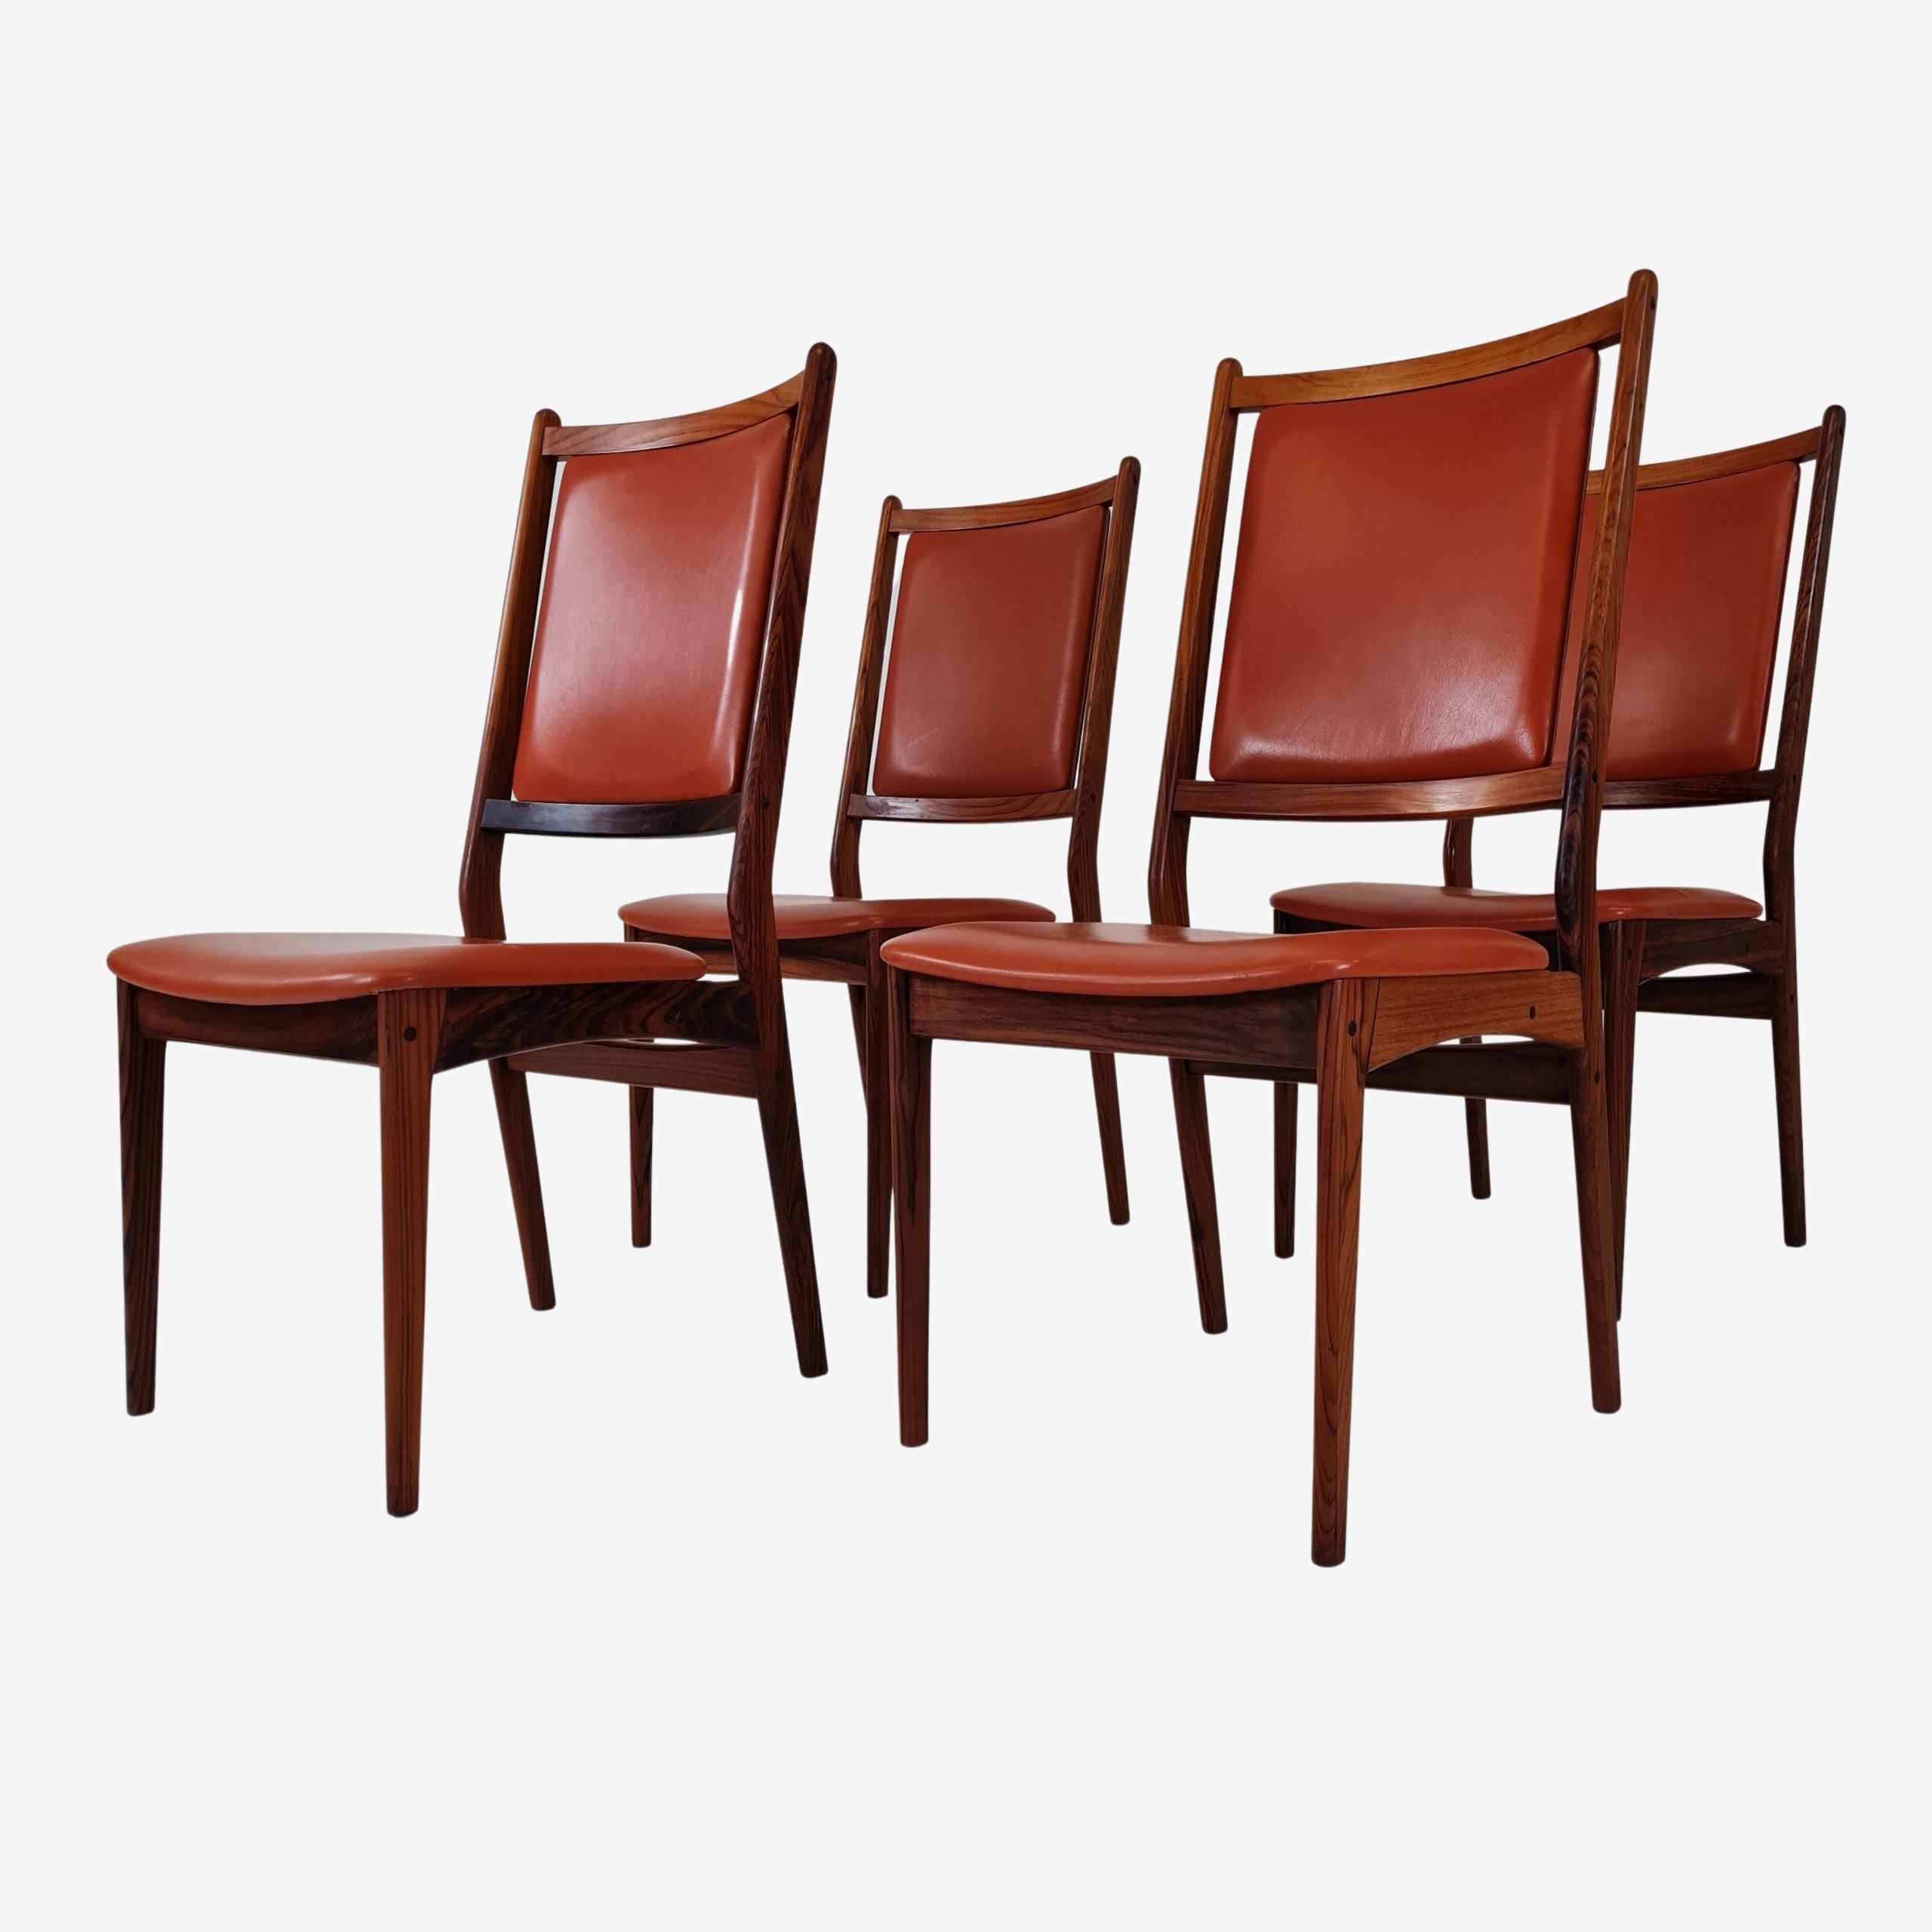 Dining table chair | Rosewood (Set of 4)